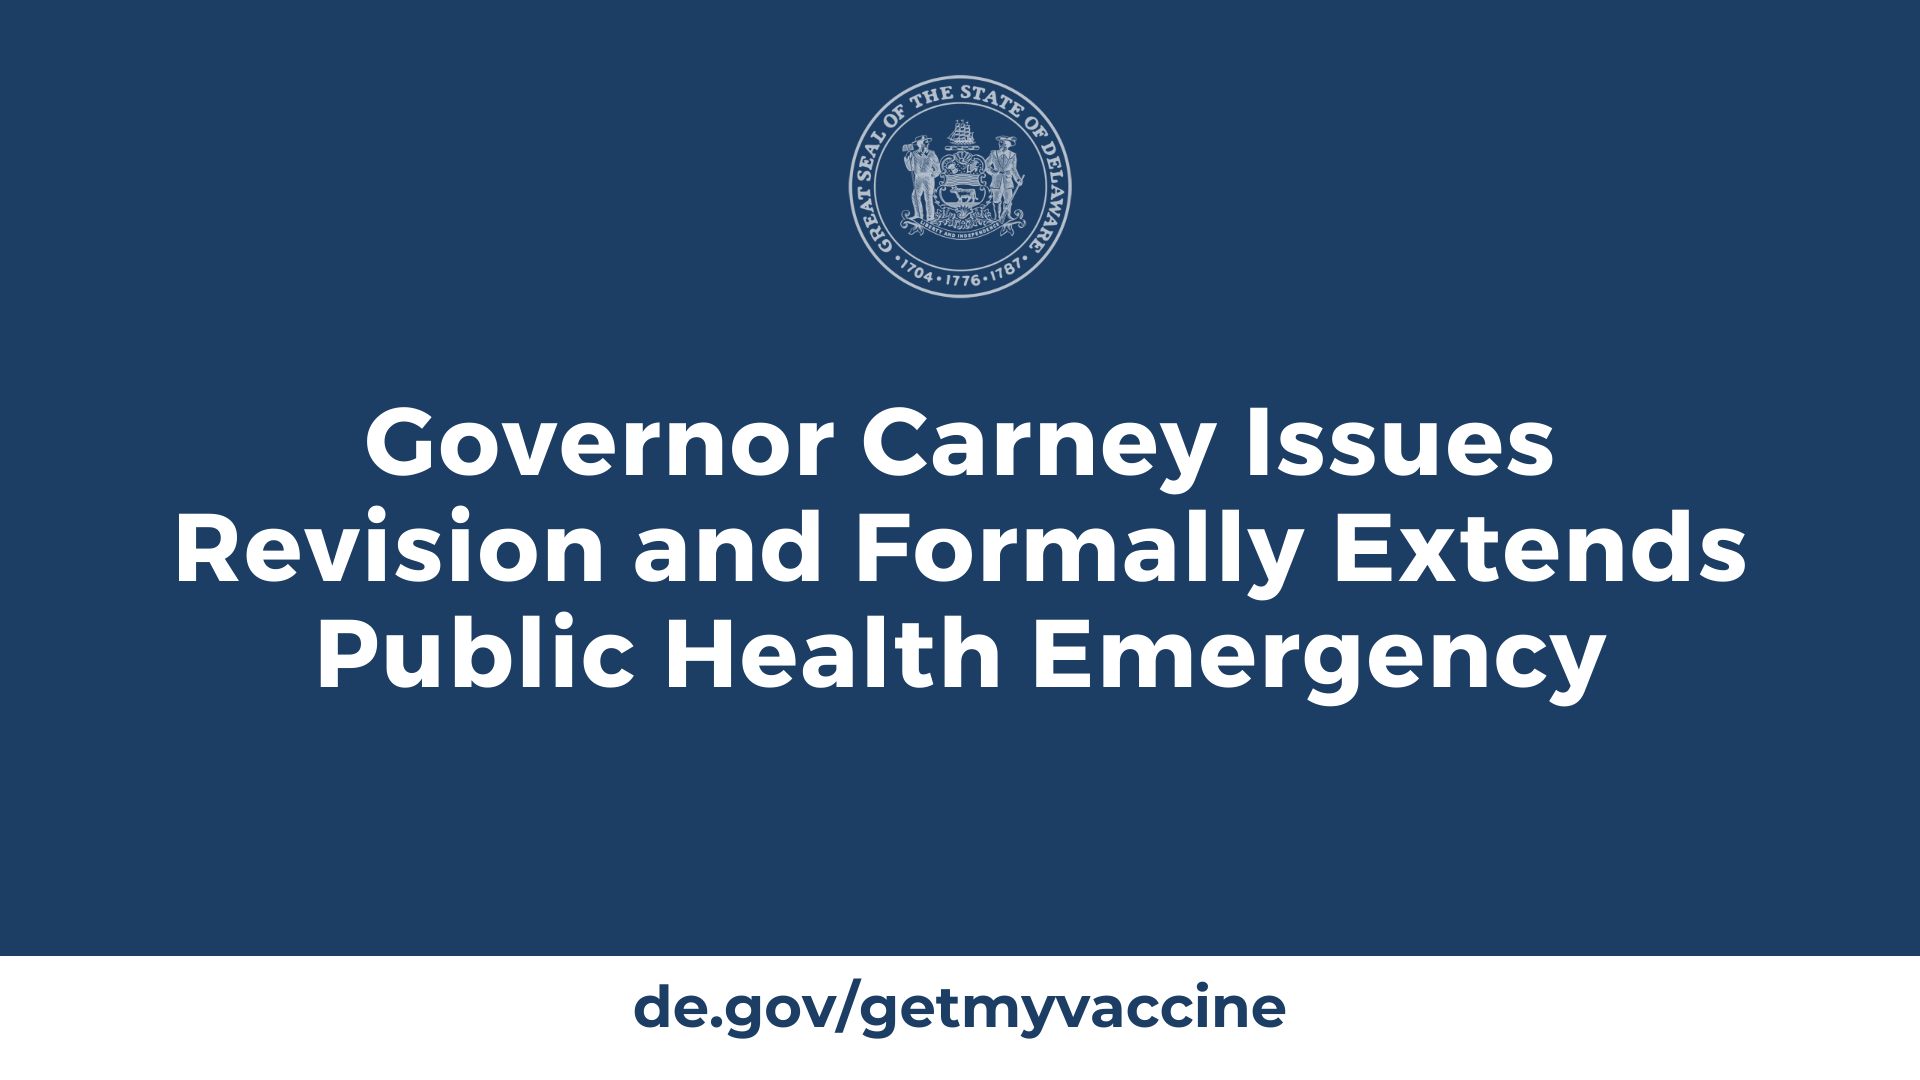 Governor Carney Issues Revision and Formally Extends Public Health EmergencyaGovernor Carney Issues Revision and Formally Extends Public Health Emergency